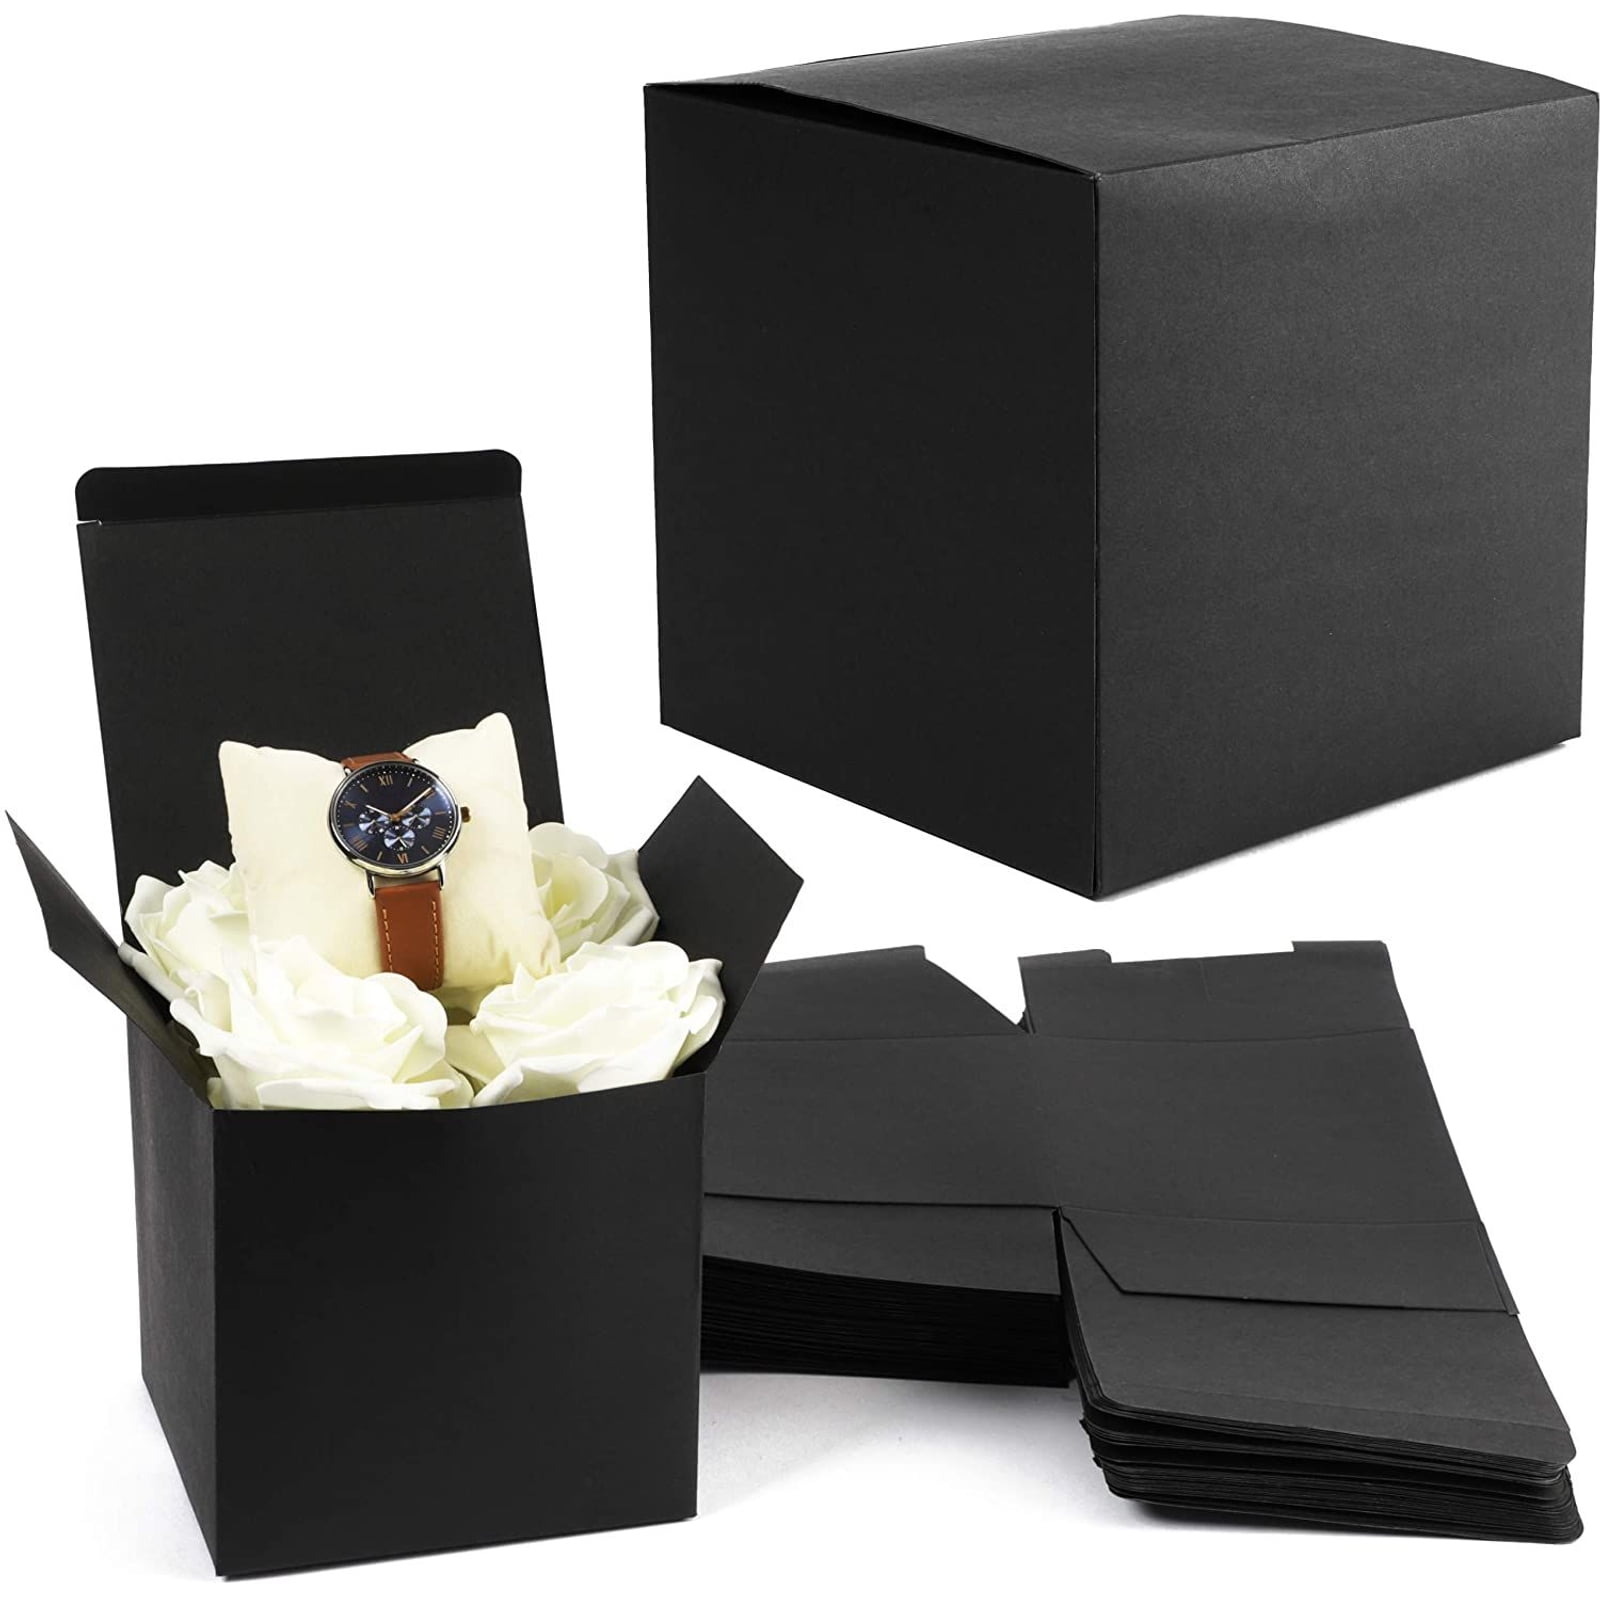 Set of 2 Black Square Flower Box with Window and Ribbon Paper Gift Boxes 2 Size 